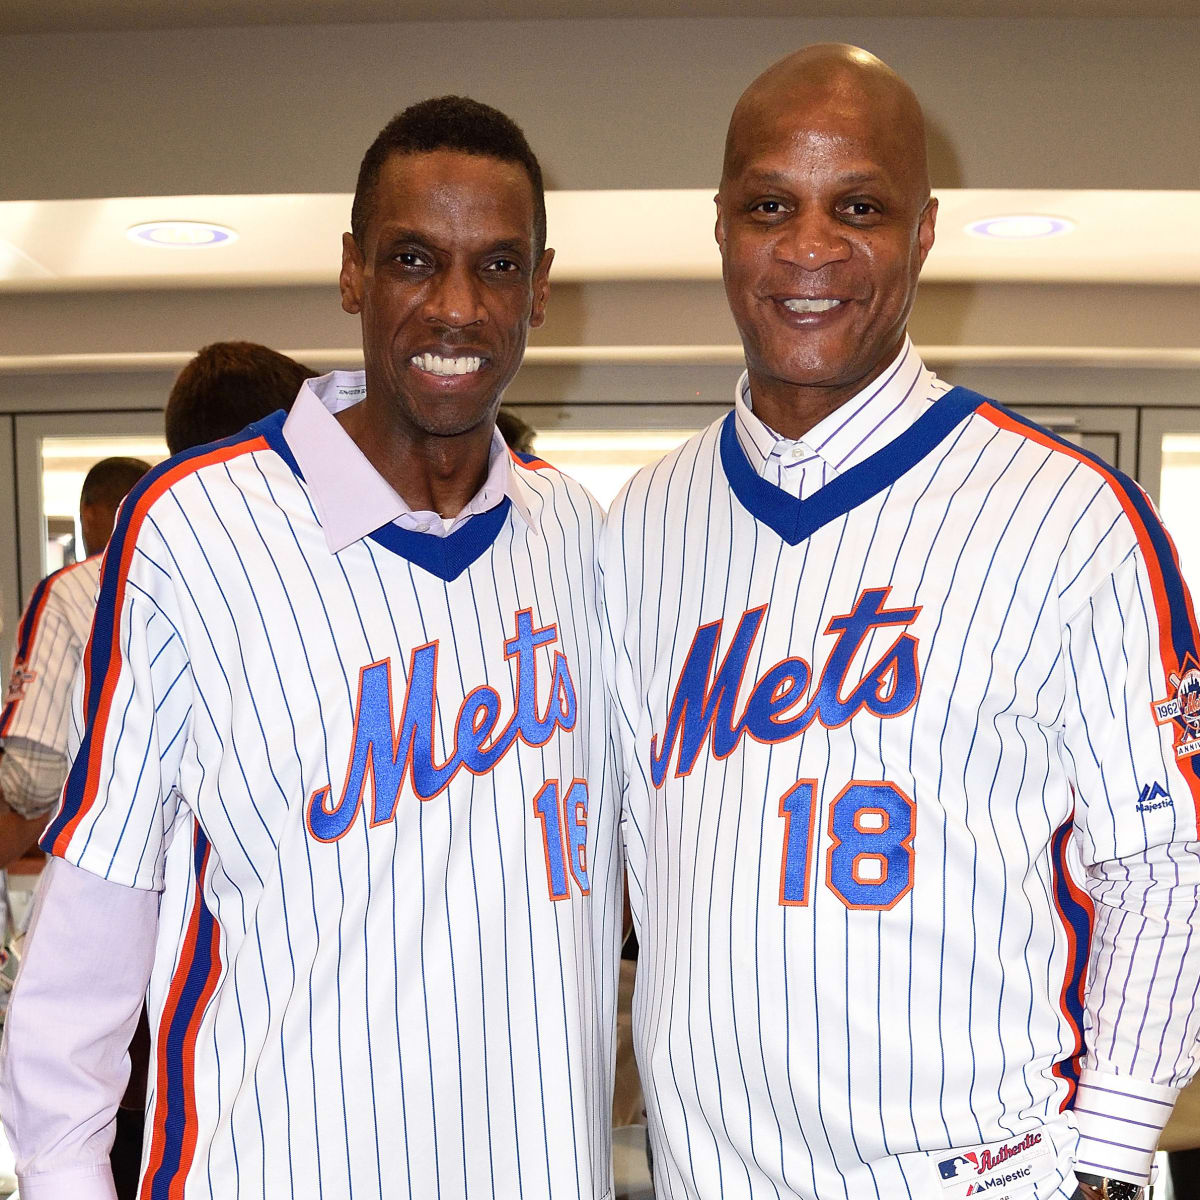 Report: Darryl Strawberry trying everything to help Dwight Doc